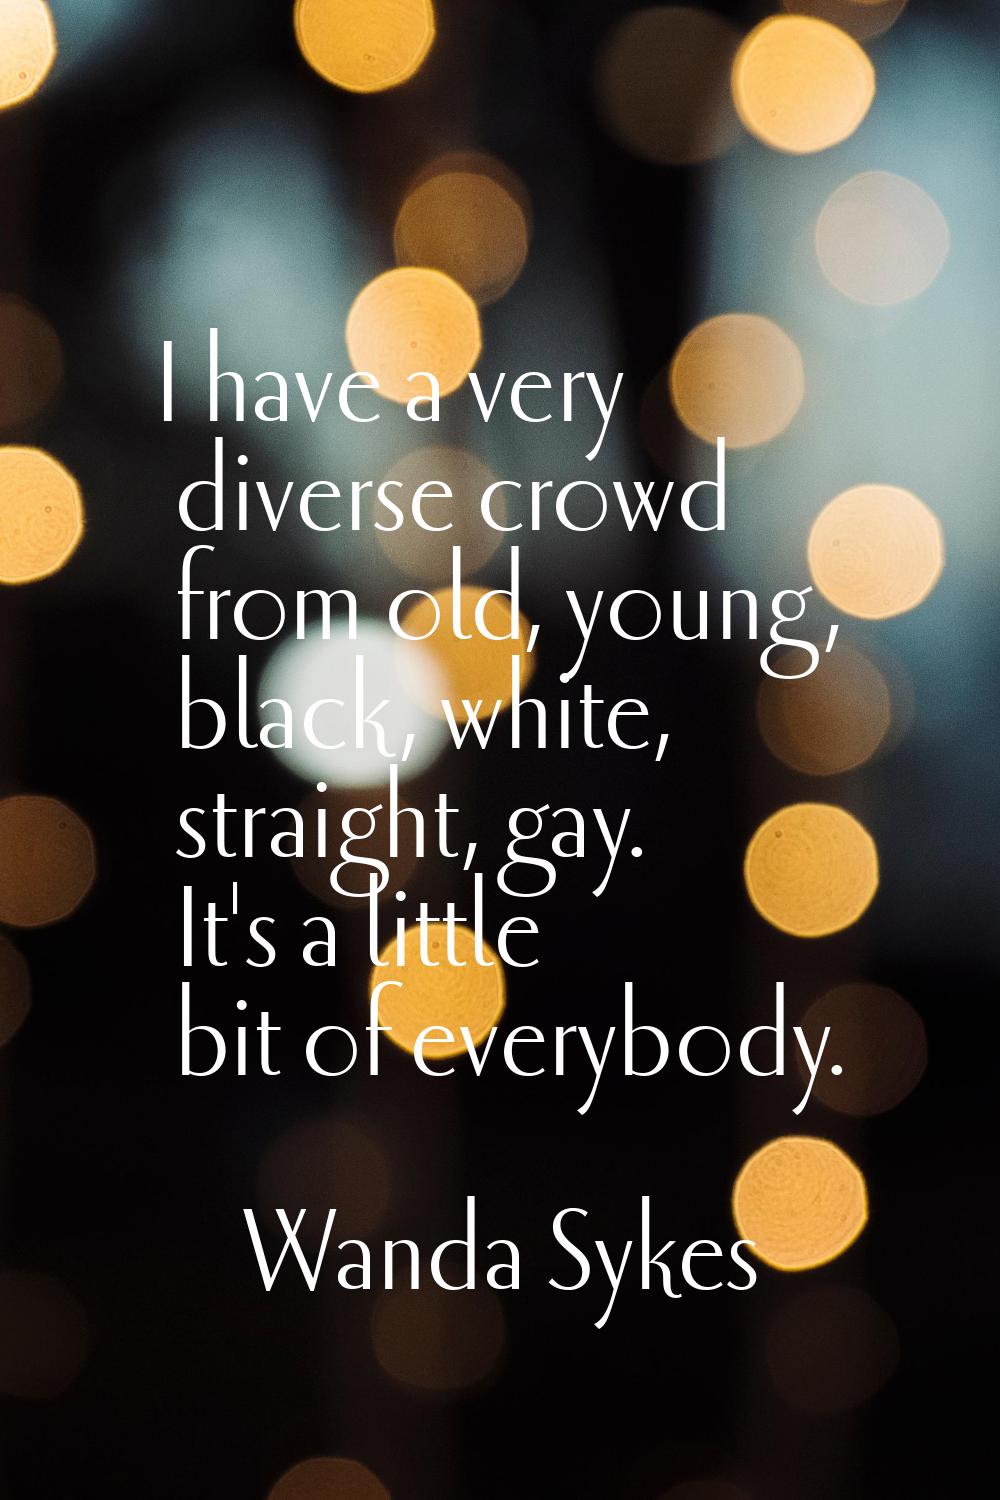 I have a very diverse crowd from old, young, black, white, straight, gay. It's a little bit of ever